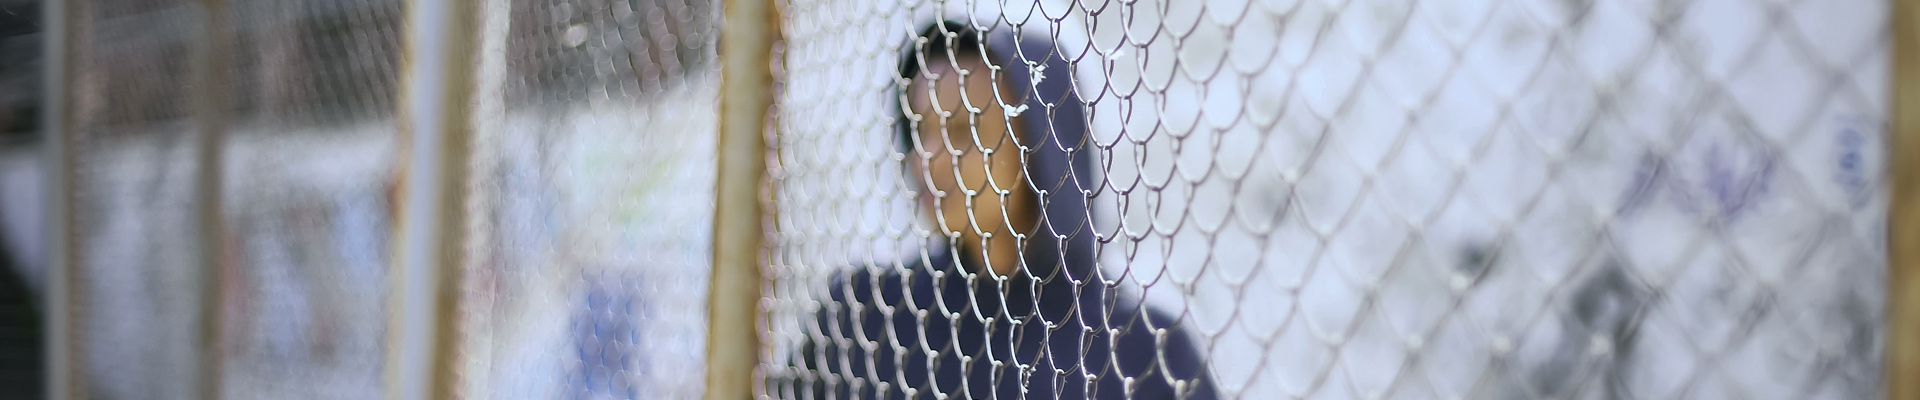 A juvenile male standing behind a chain link fence